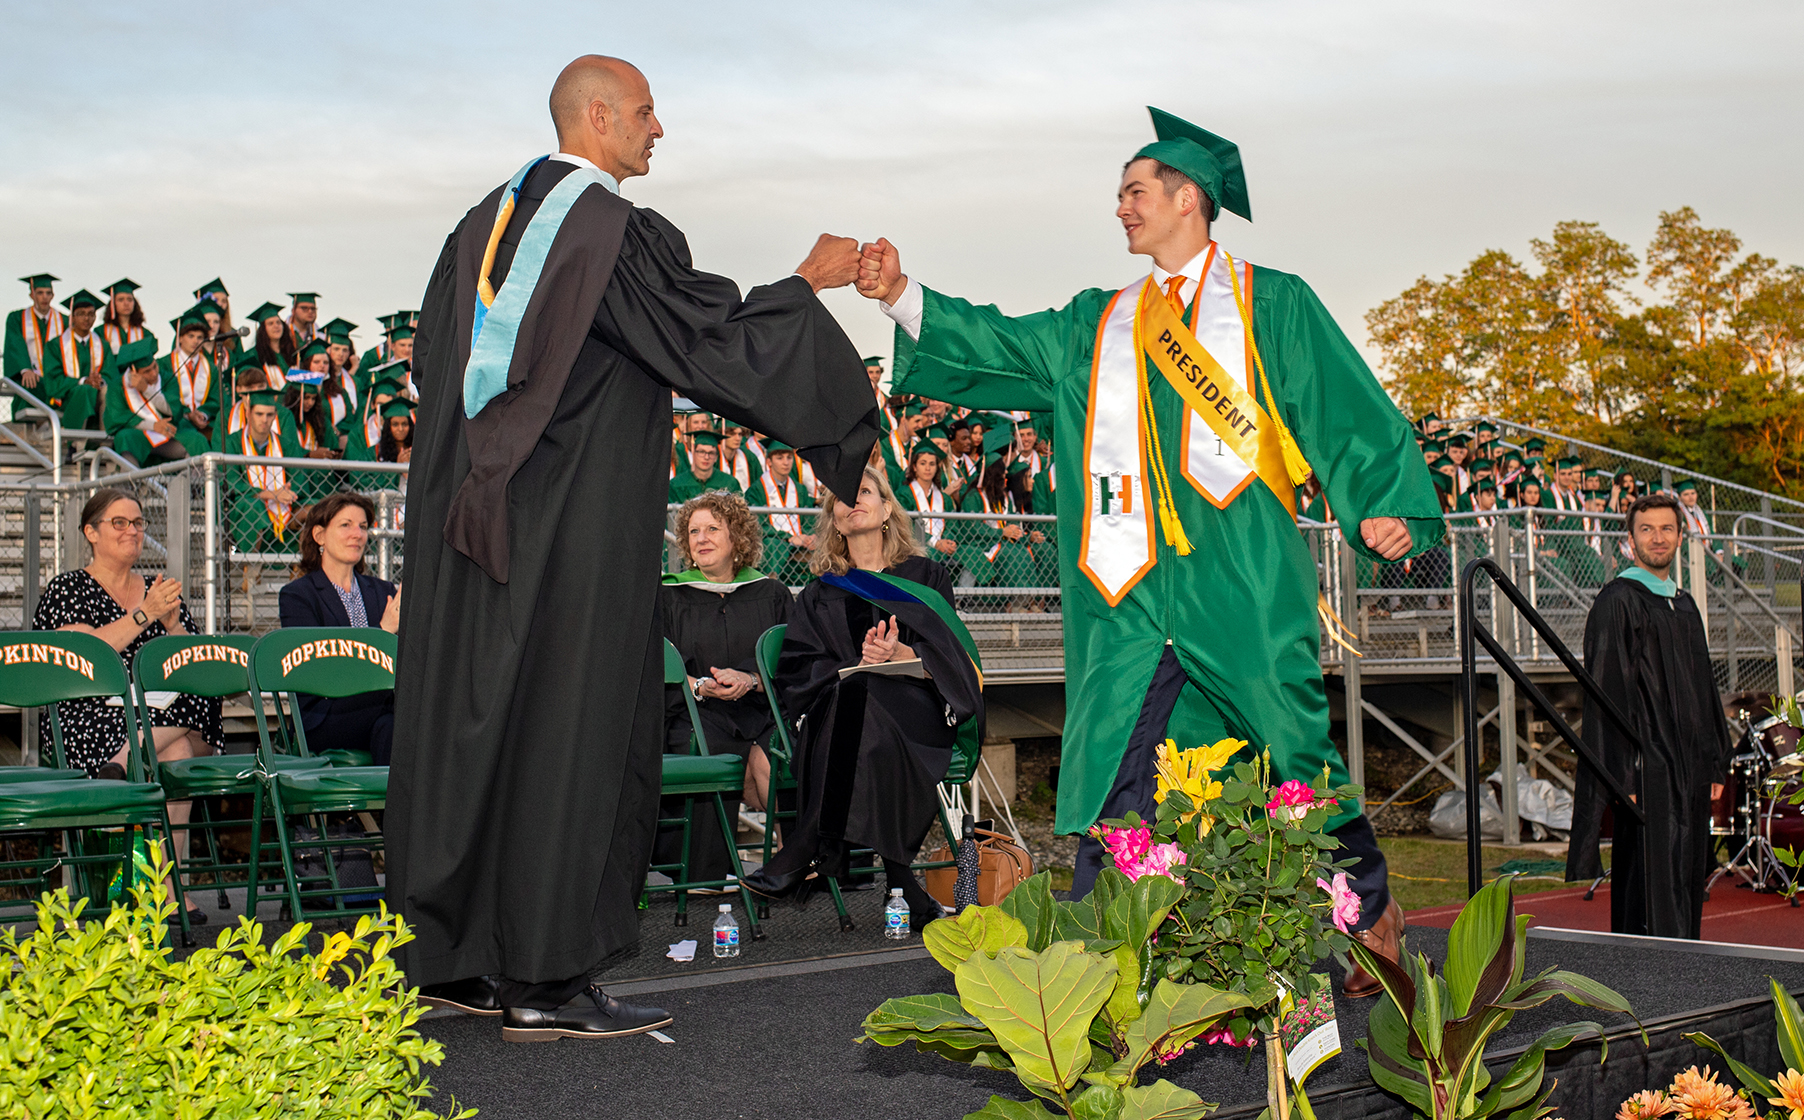 HHS Class of 2021 gets ‘appropriate and joyous send-off’ at graduation